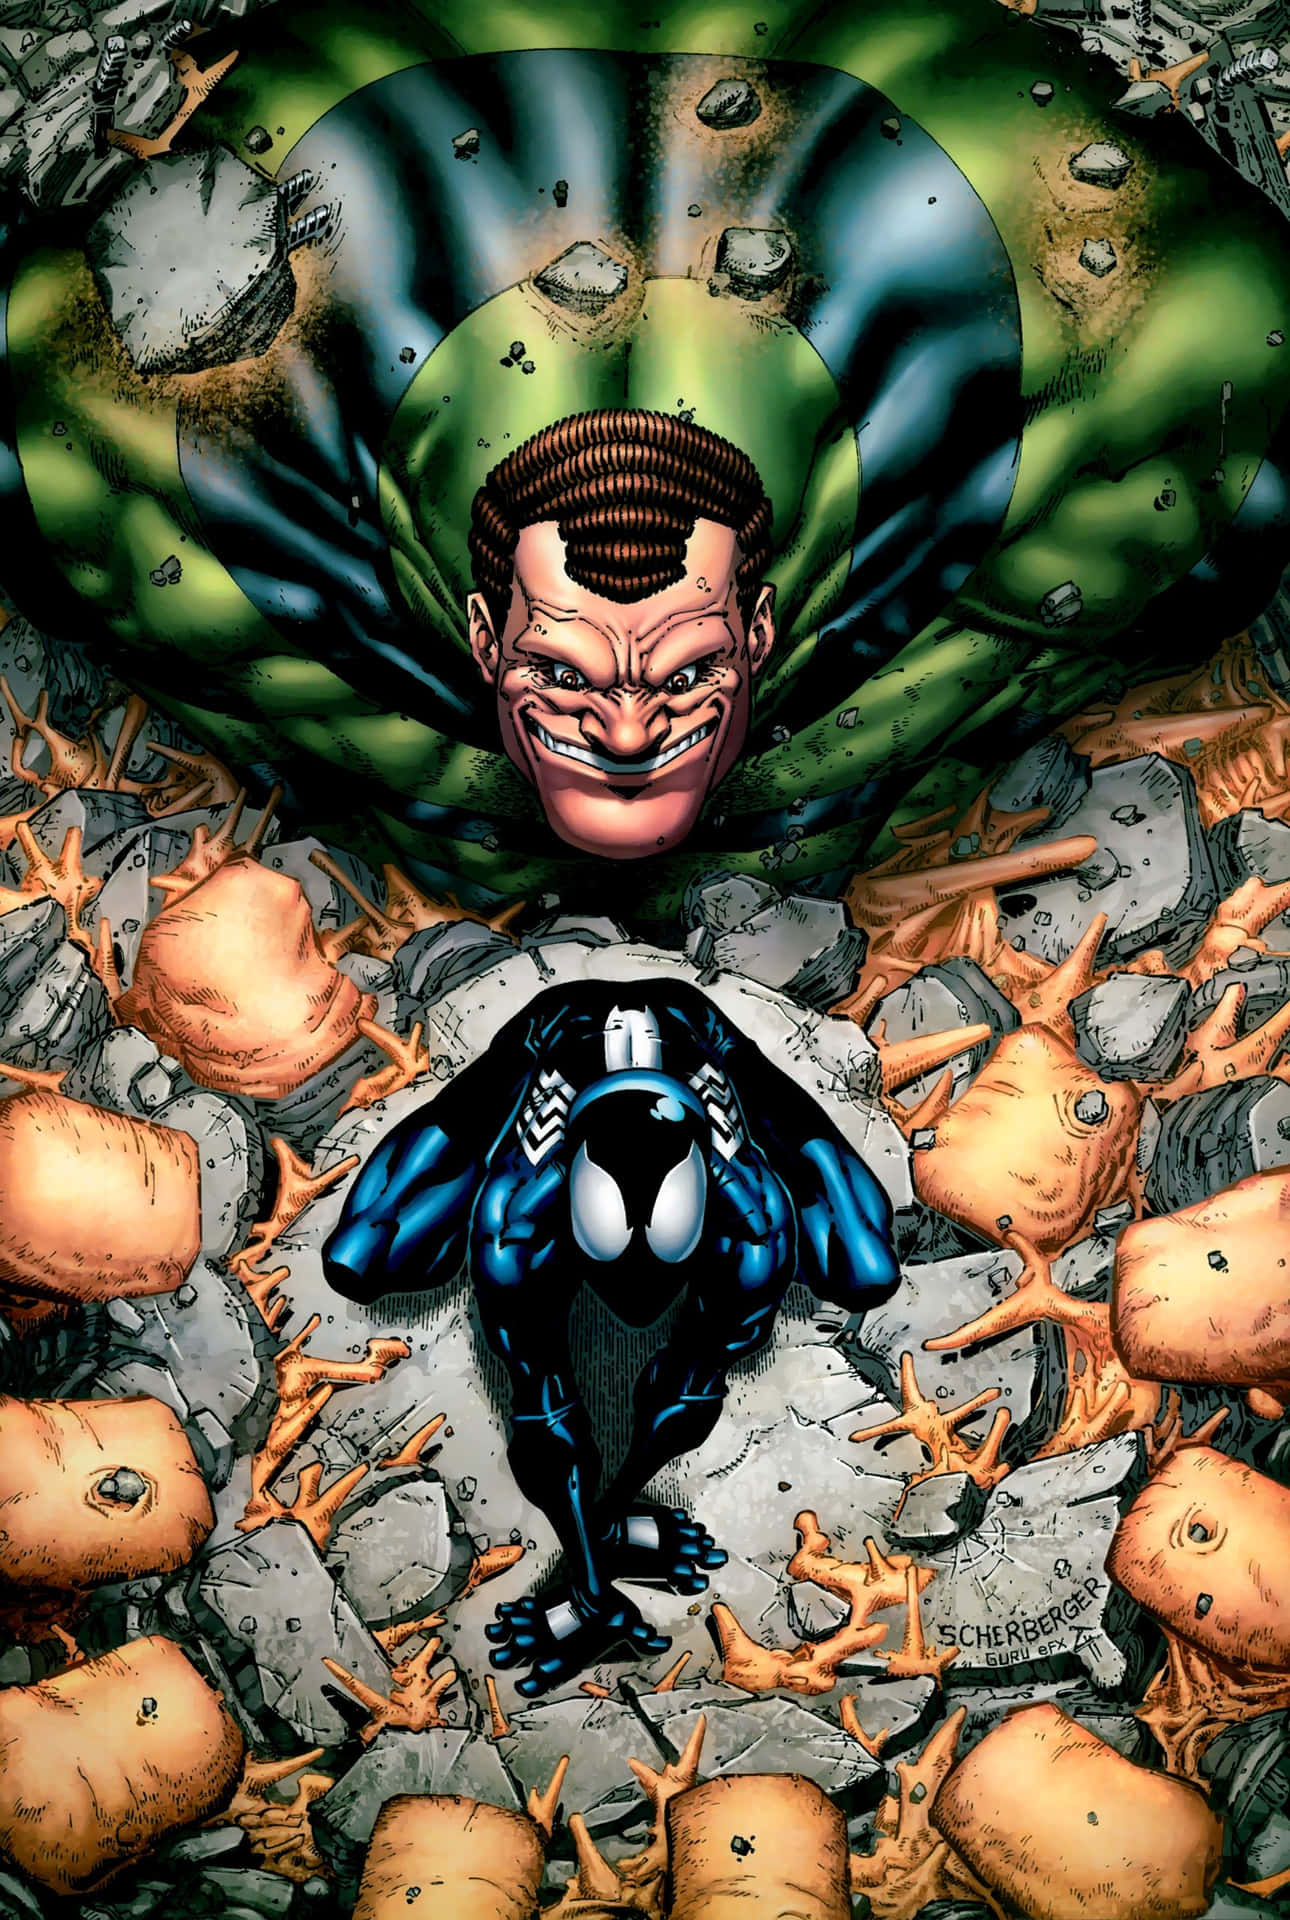 Spider - Man And A Green Man In The Middle Of A Pile Of Rocks Background